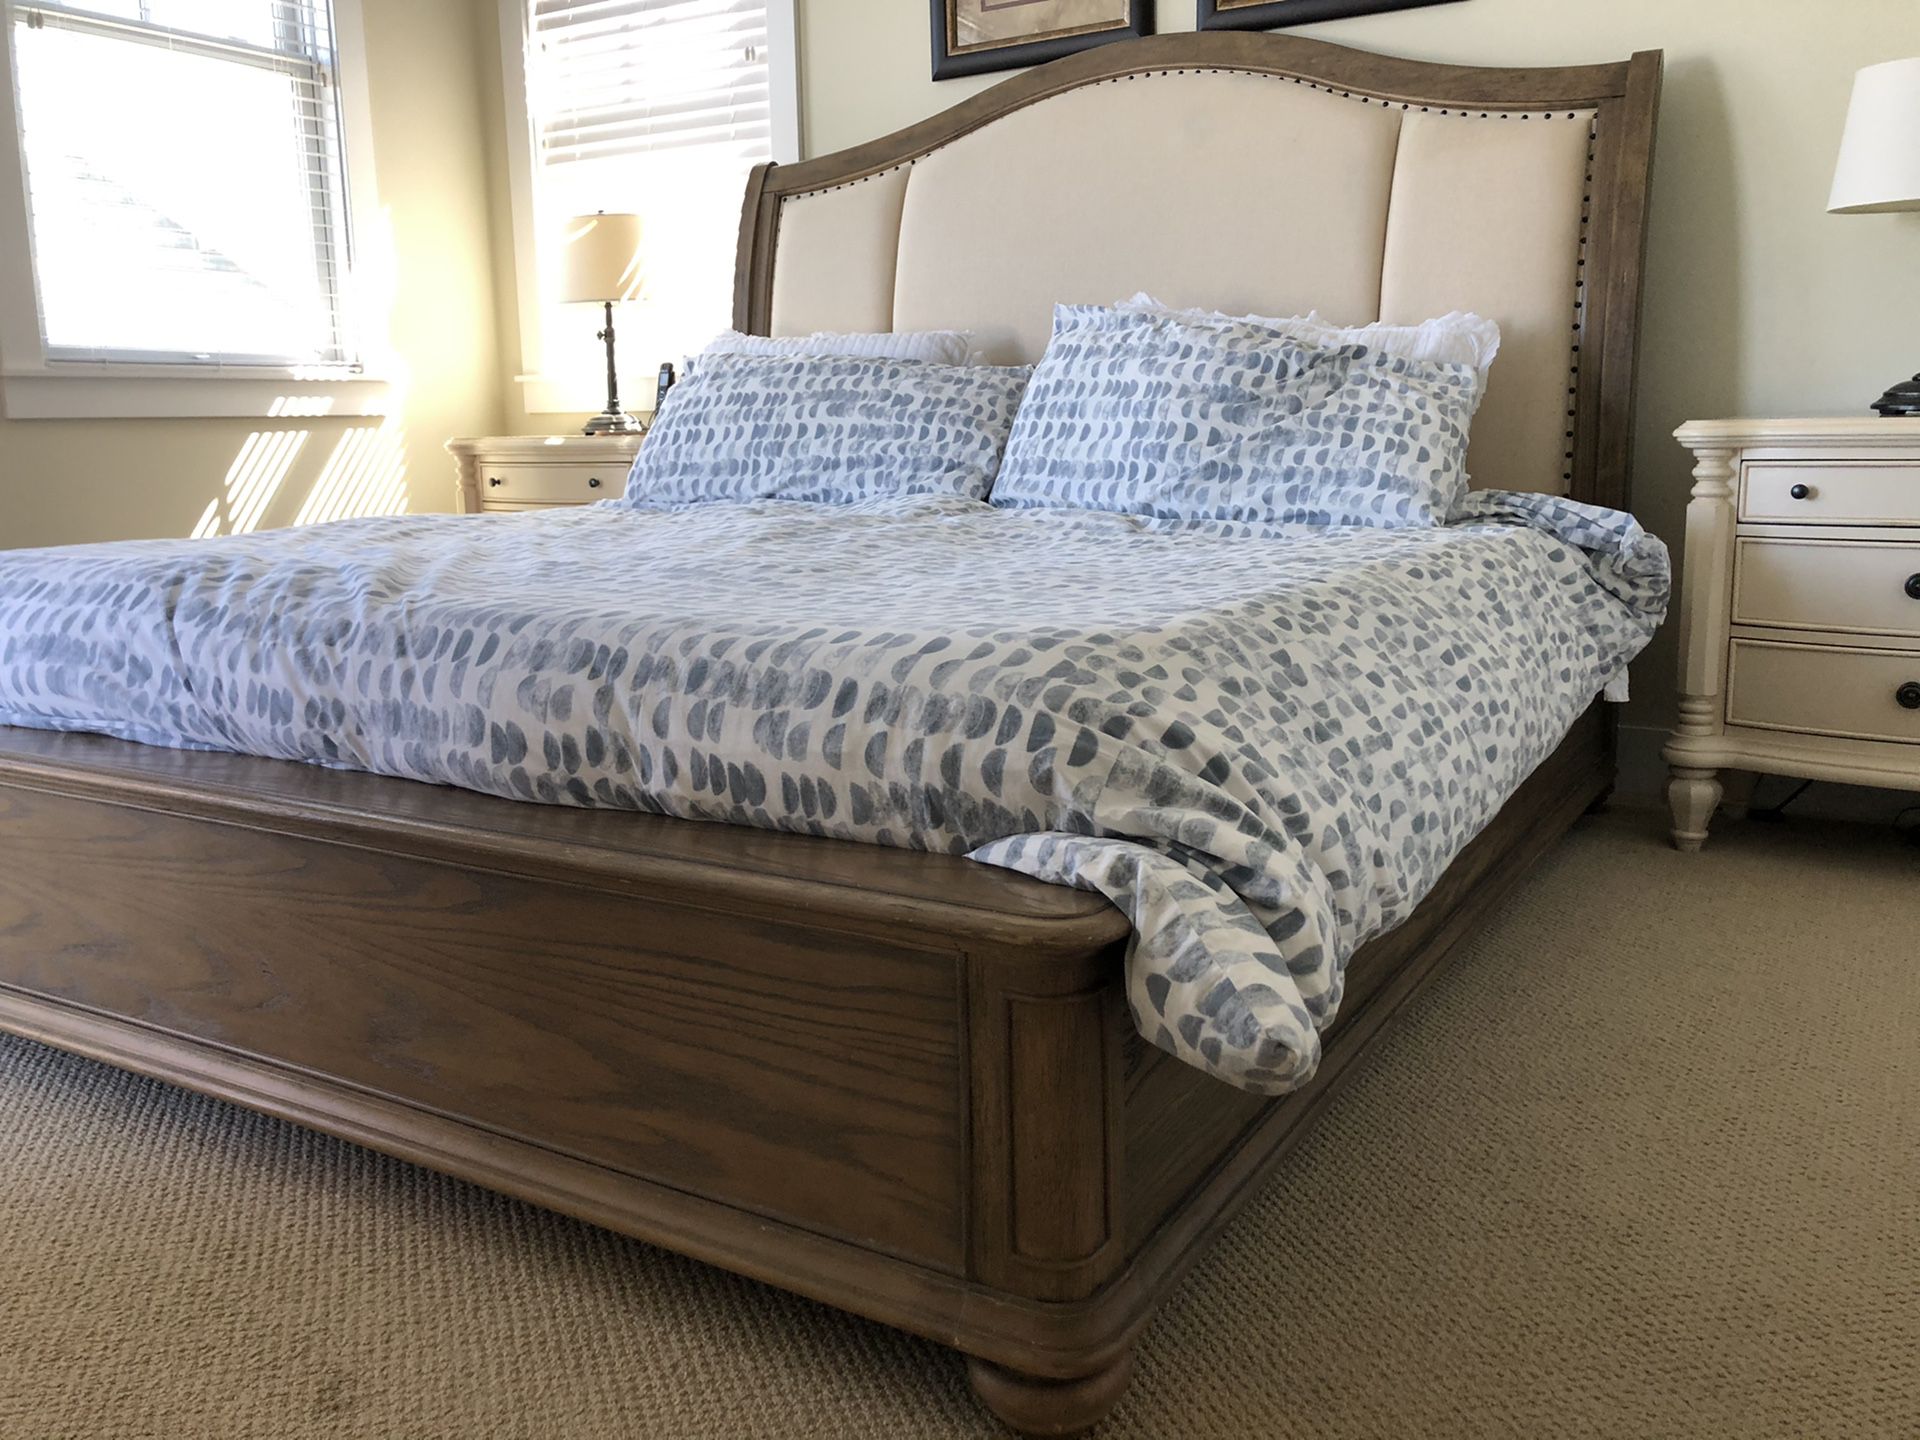 King bed, padded headboard with dresser and 2 night stands